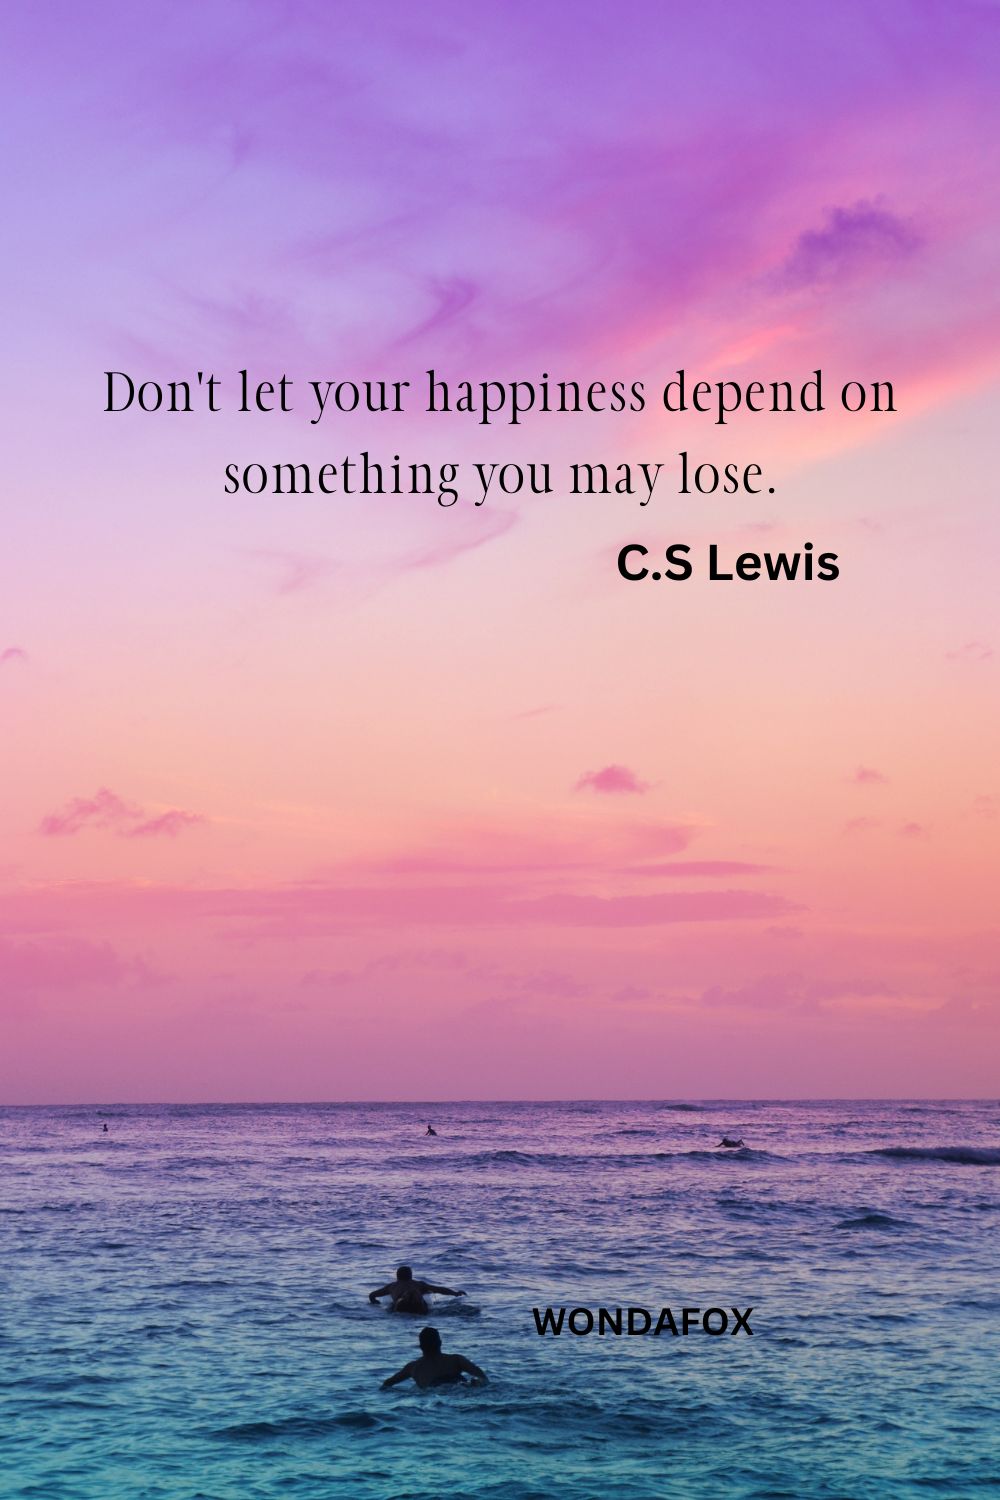 Don't let your happiness depend on something you may lose.
C.S Lewis